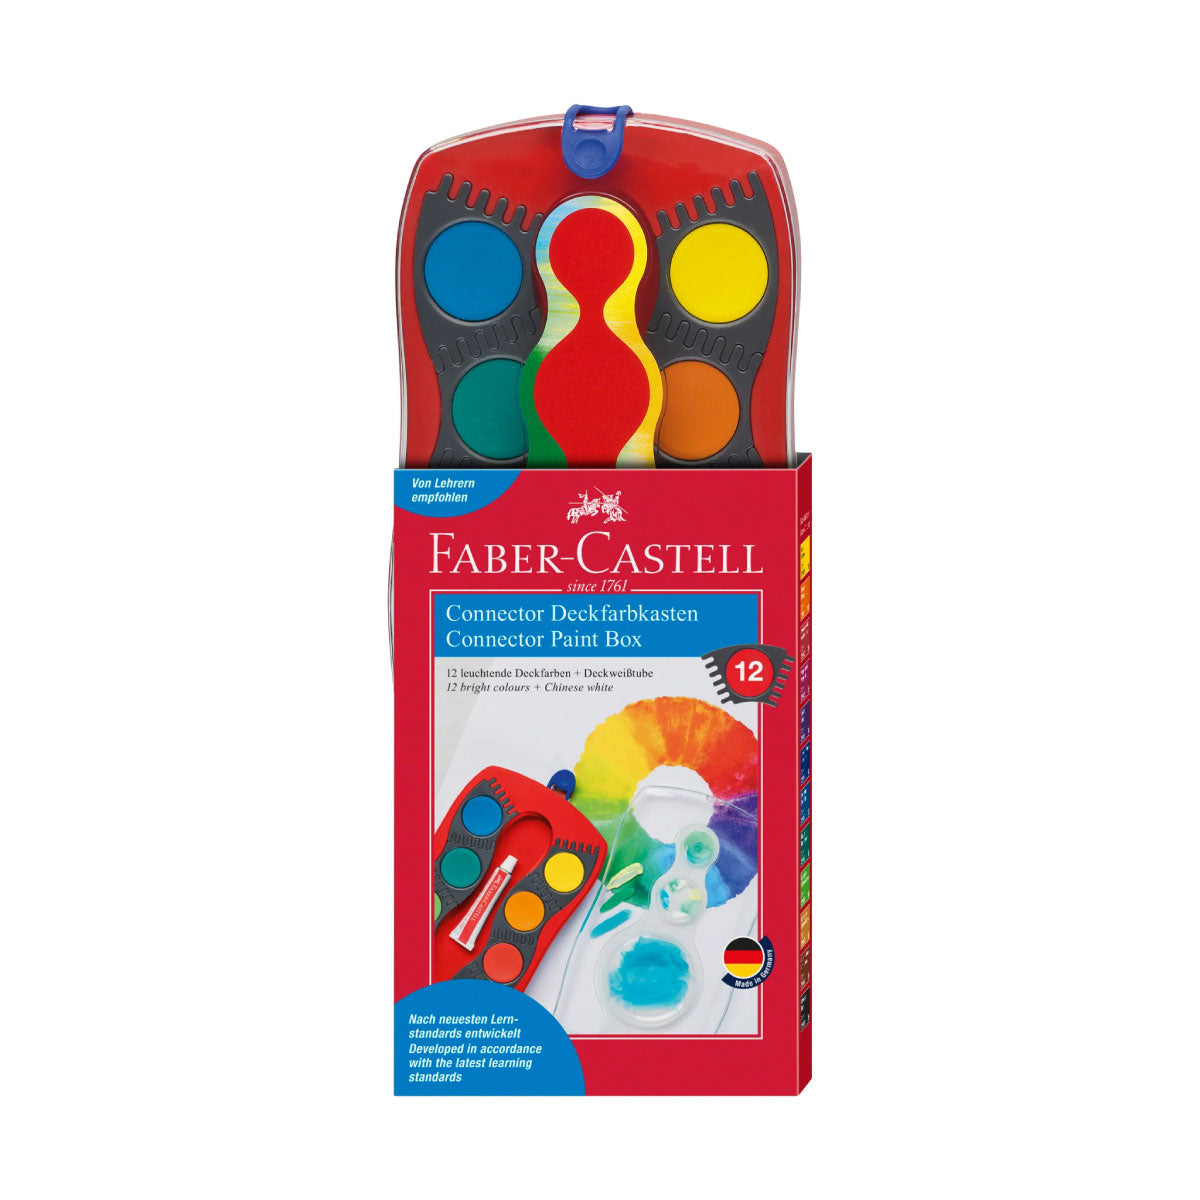 Faber Castell Connector 12 Watercolor Paint Box